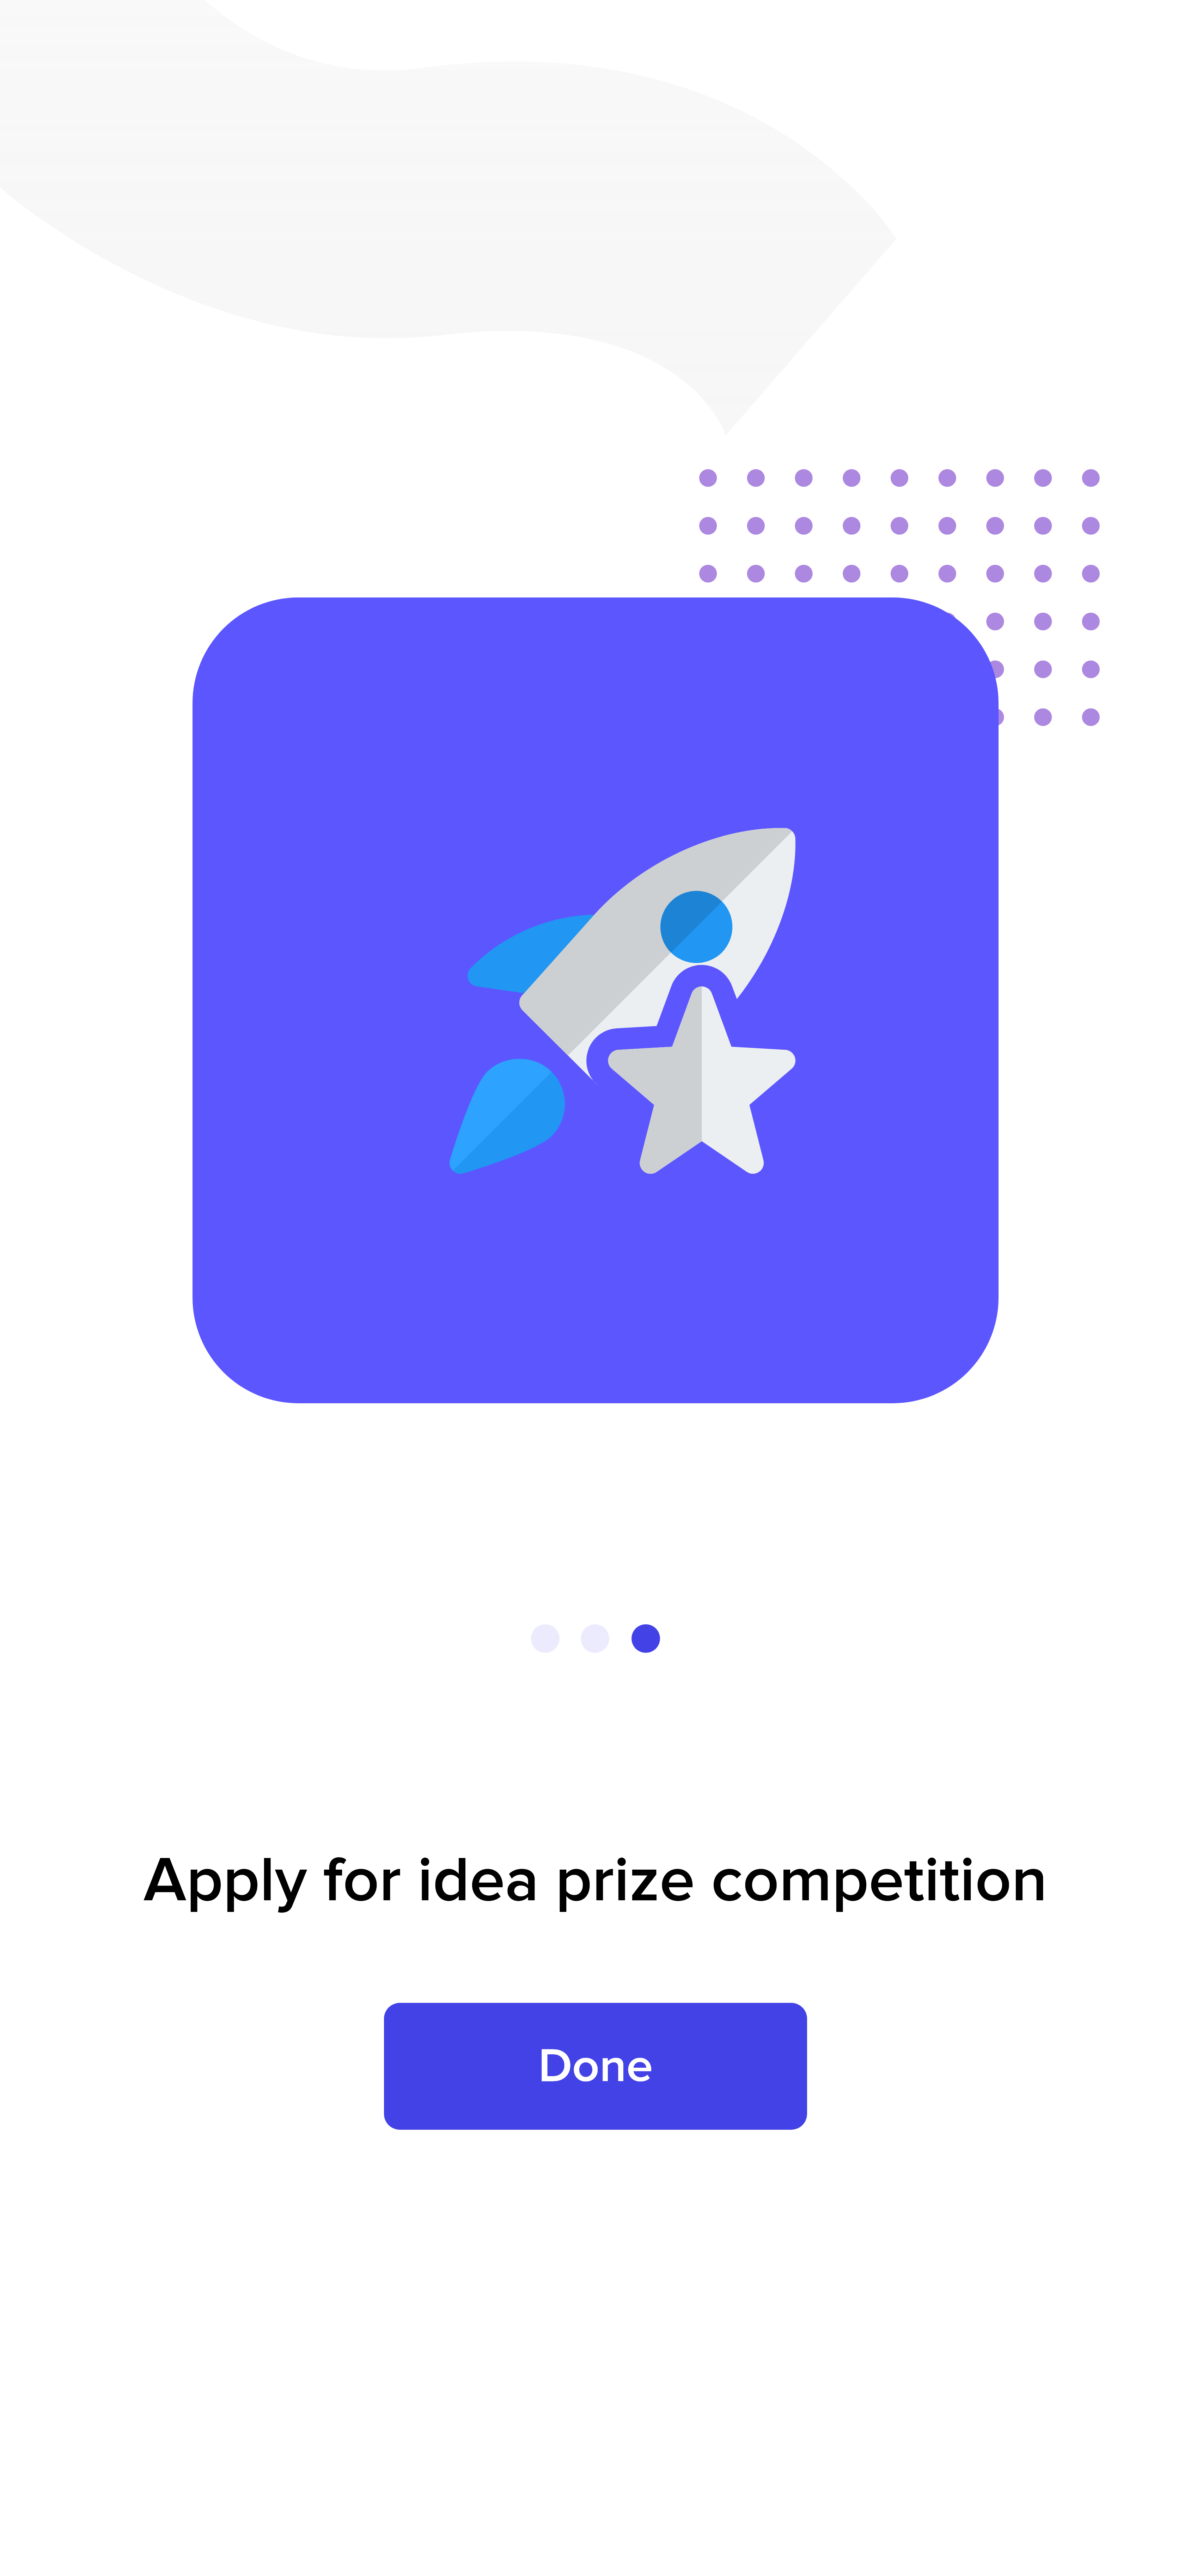 Apply for idea prize competition